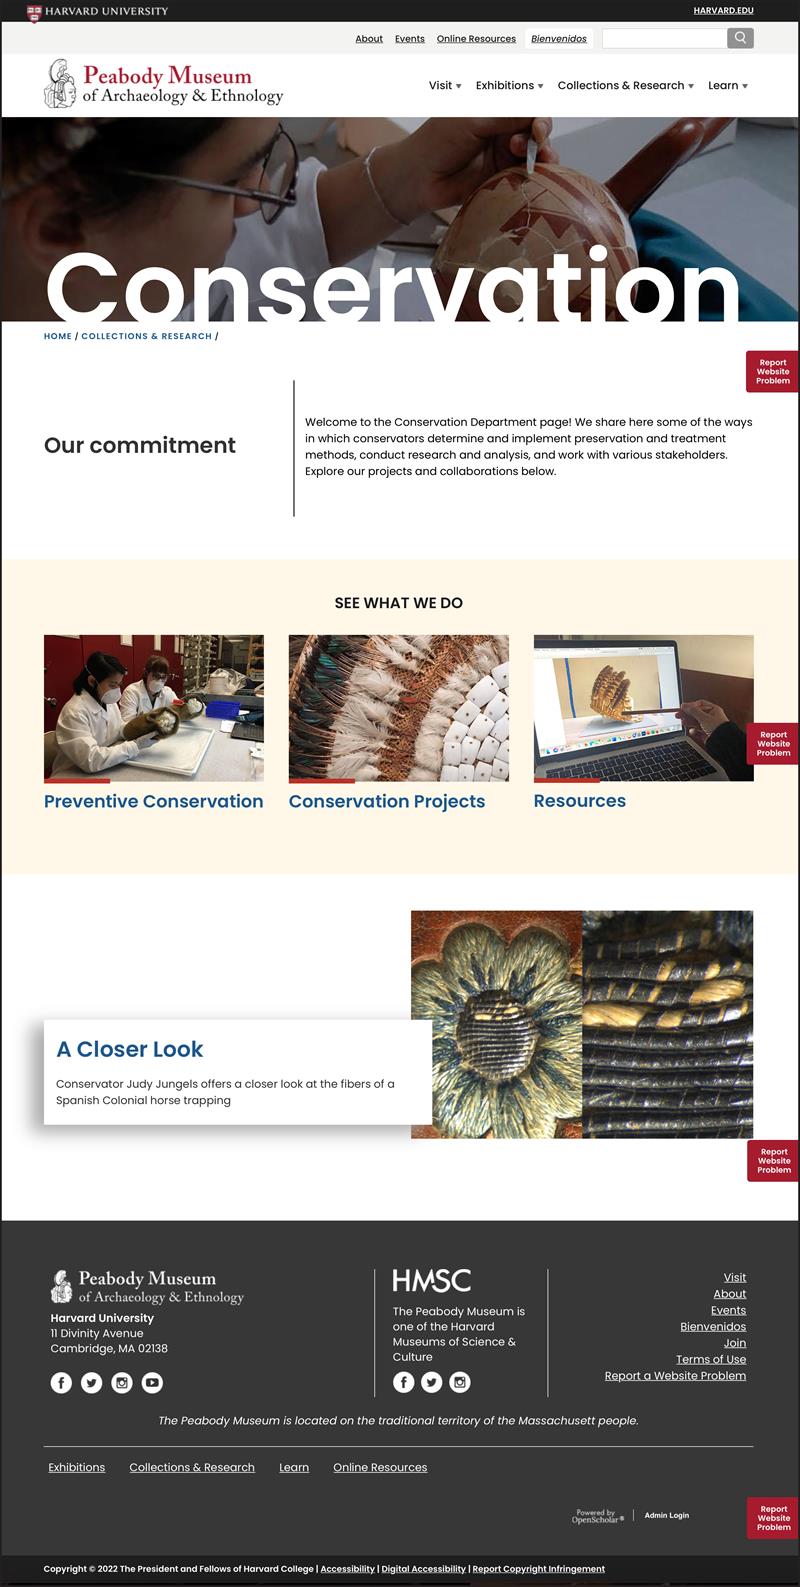 Image of the new Peabody Museum webpage for their conservation department.